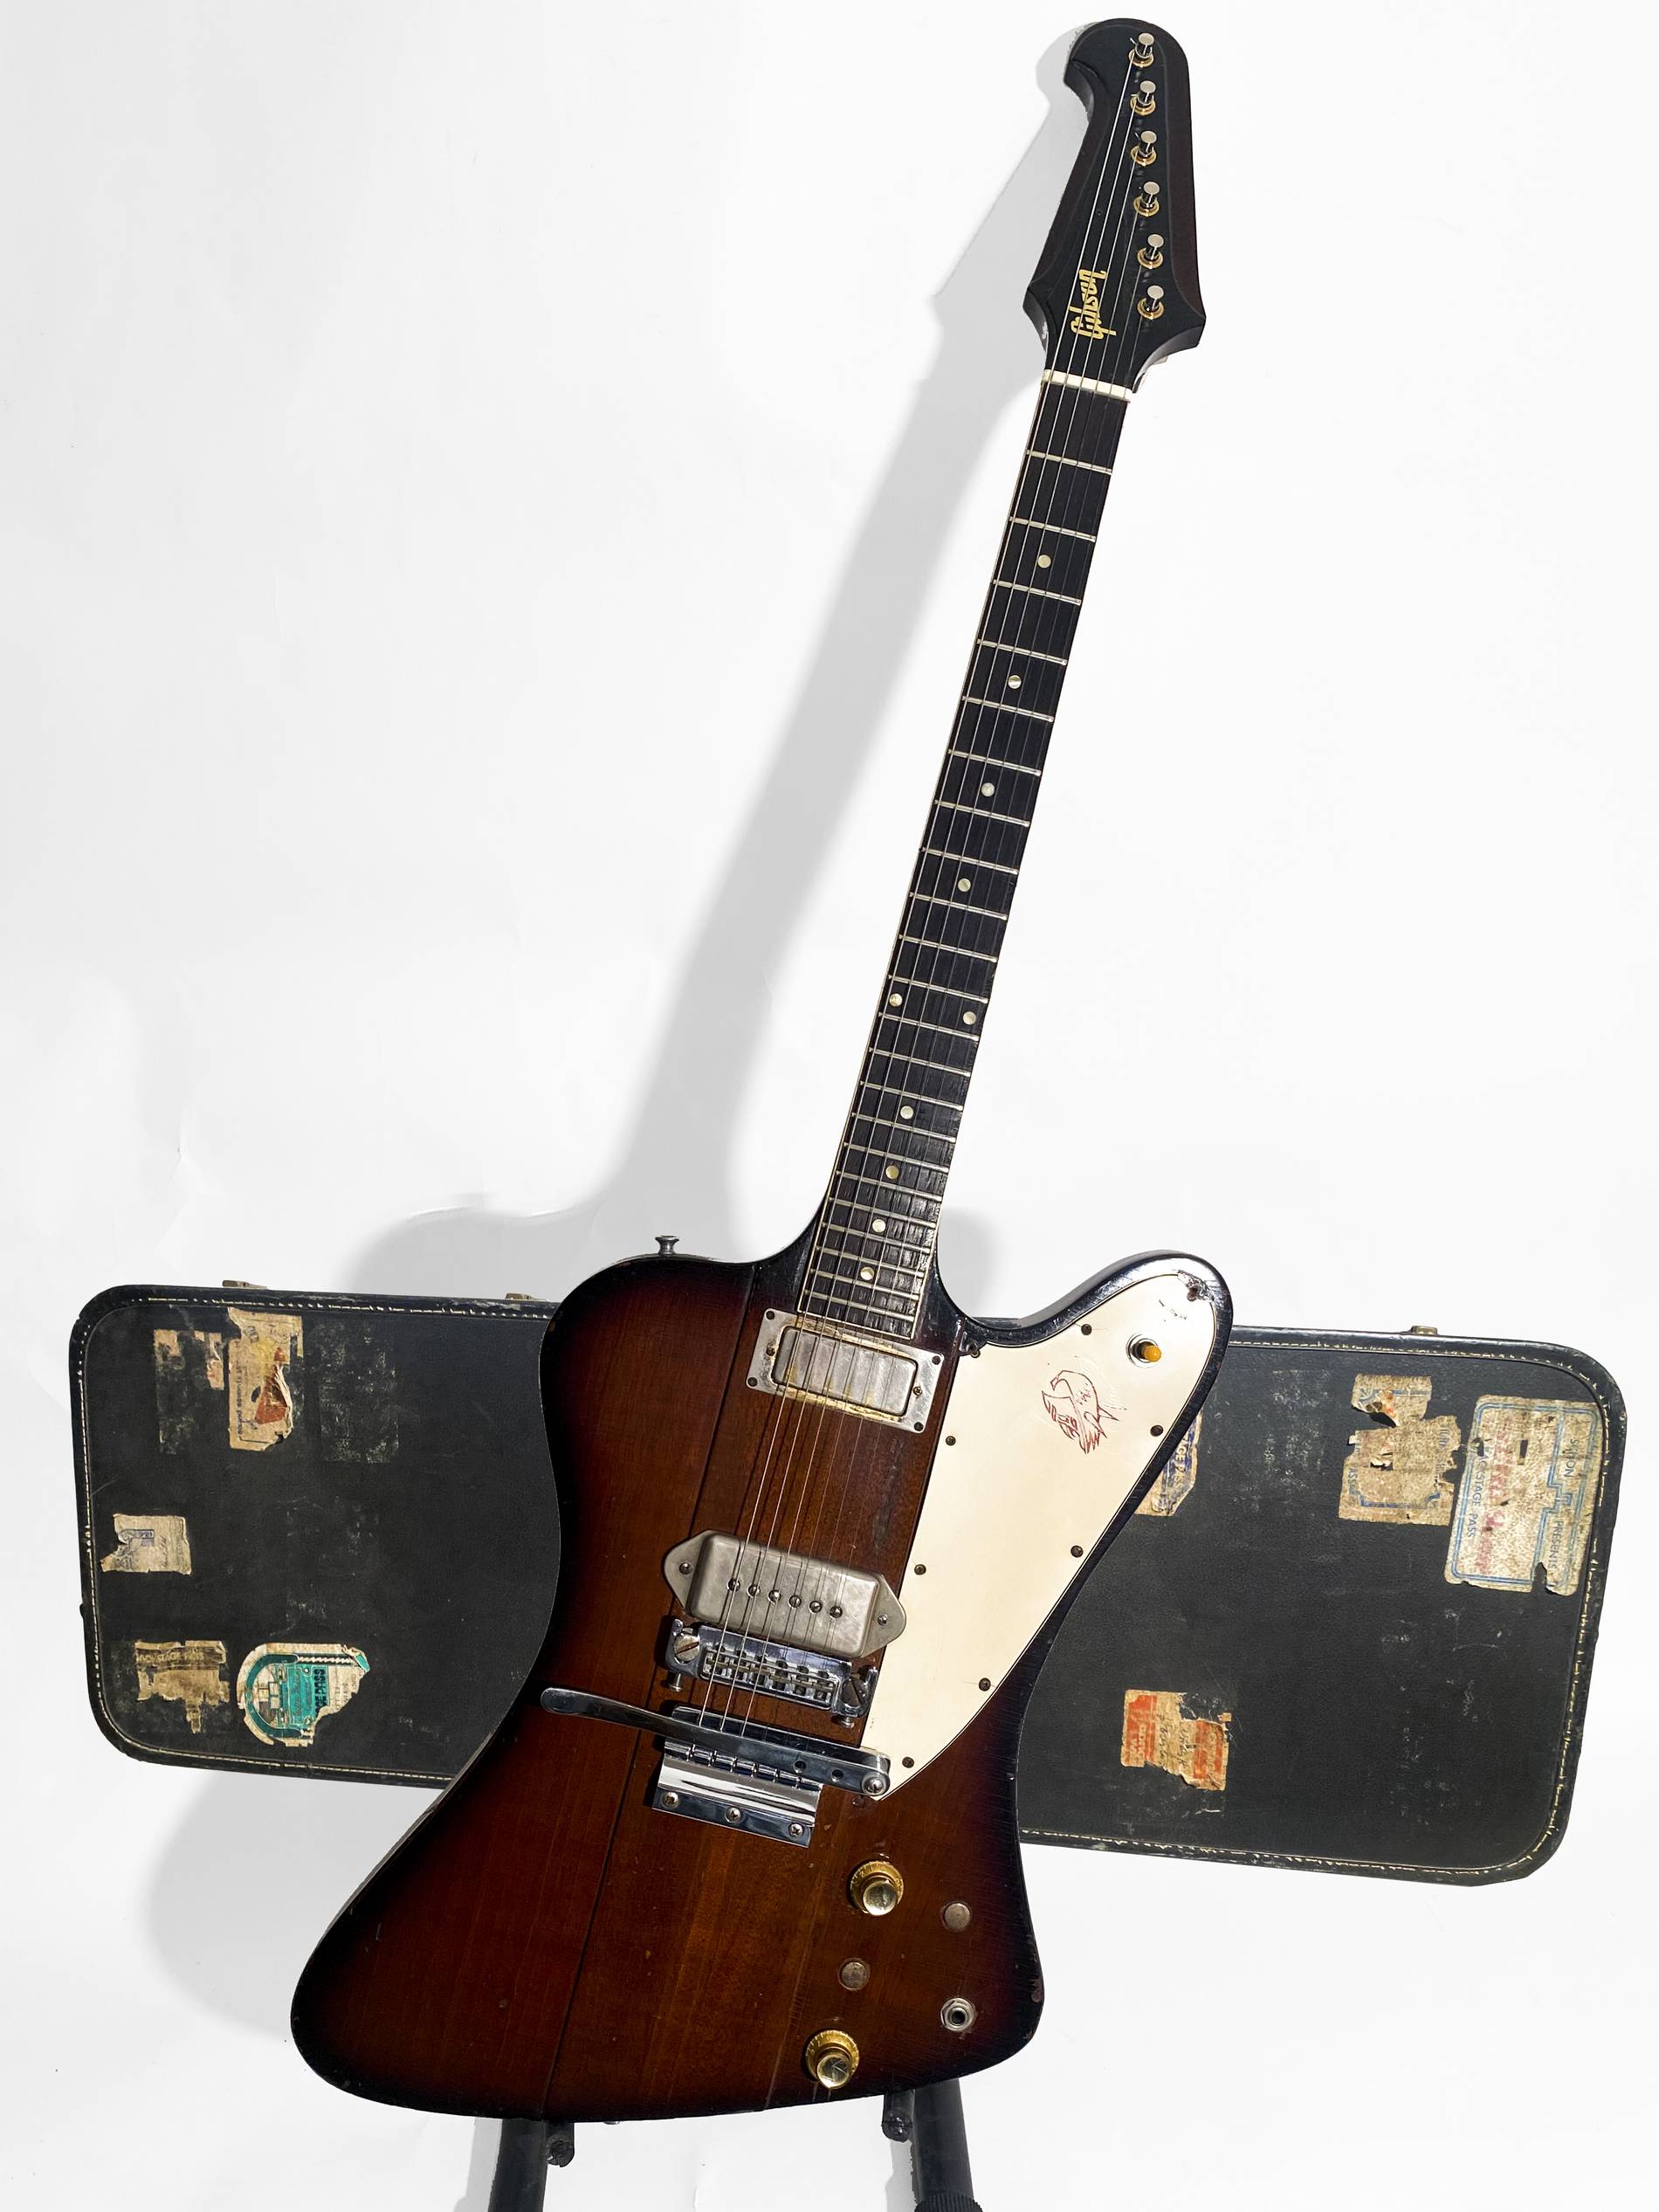 Allen Collins / Lynyrd Skynyrd Firebird guitar. Allen was one of the founding members of the famed group. He survived the terrible plane crash that killed several members of the band. He went on to become a lead member of the group that re-emerged years after the crash. This Gibson Firebird is known as the “Freebird Guitar” as Allen often performed that wildly popular song in front of live audiences with this instrument.